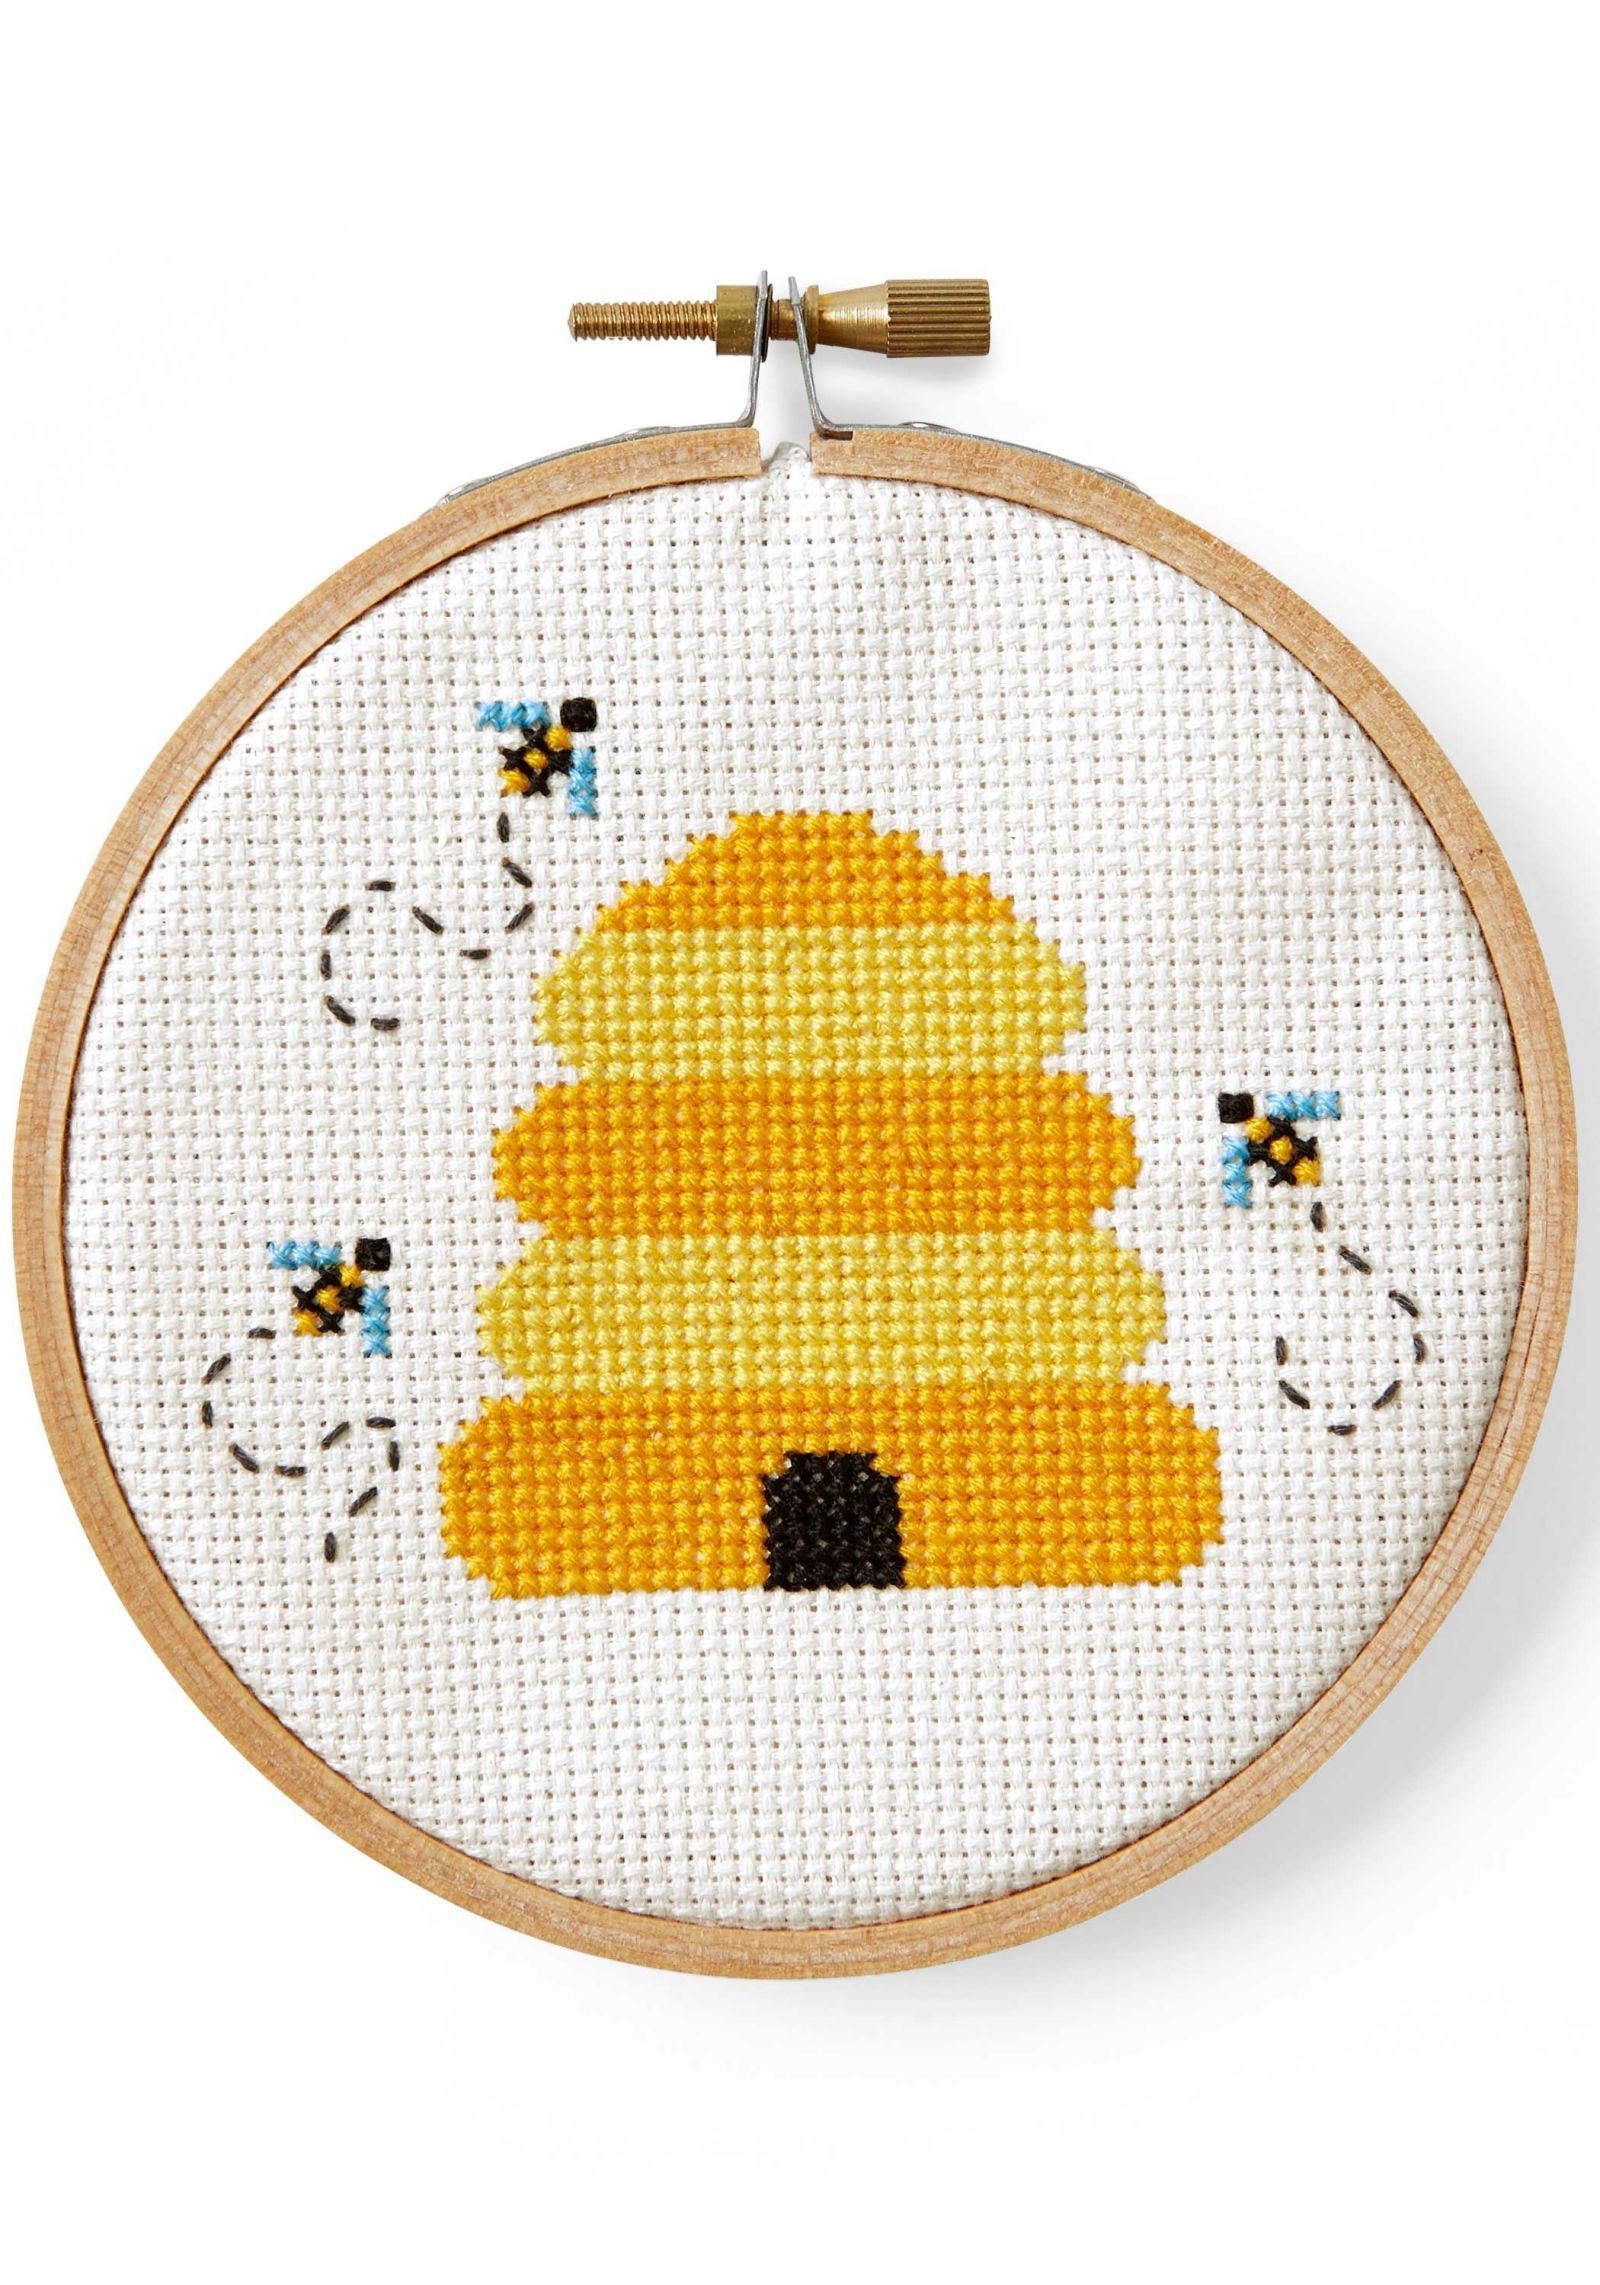 embroidery sampler pattern free